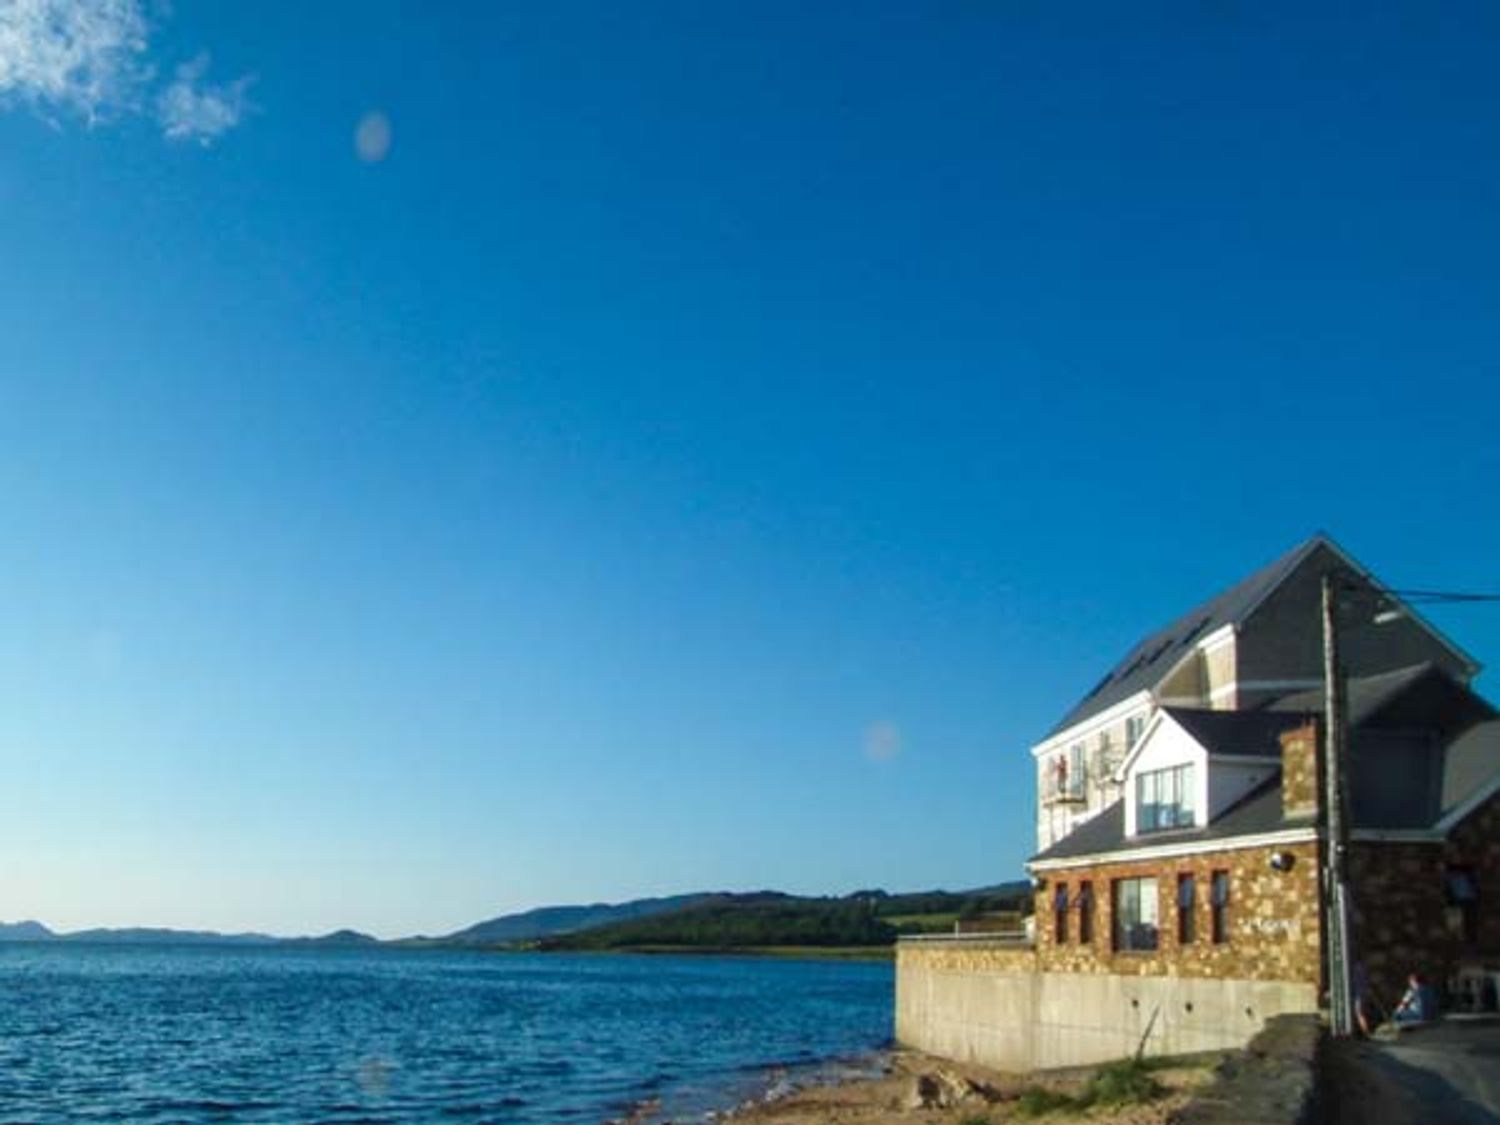 The Beach House Apartment - County Donegal - 919203 - photo 1